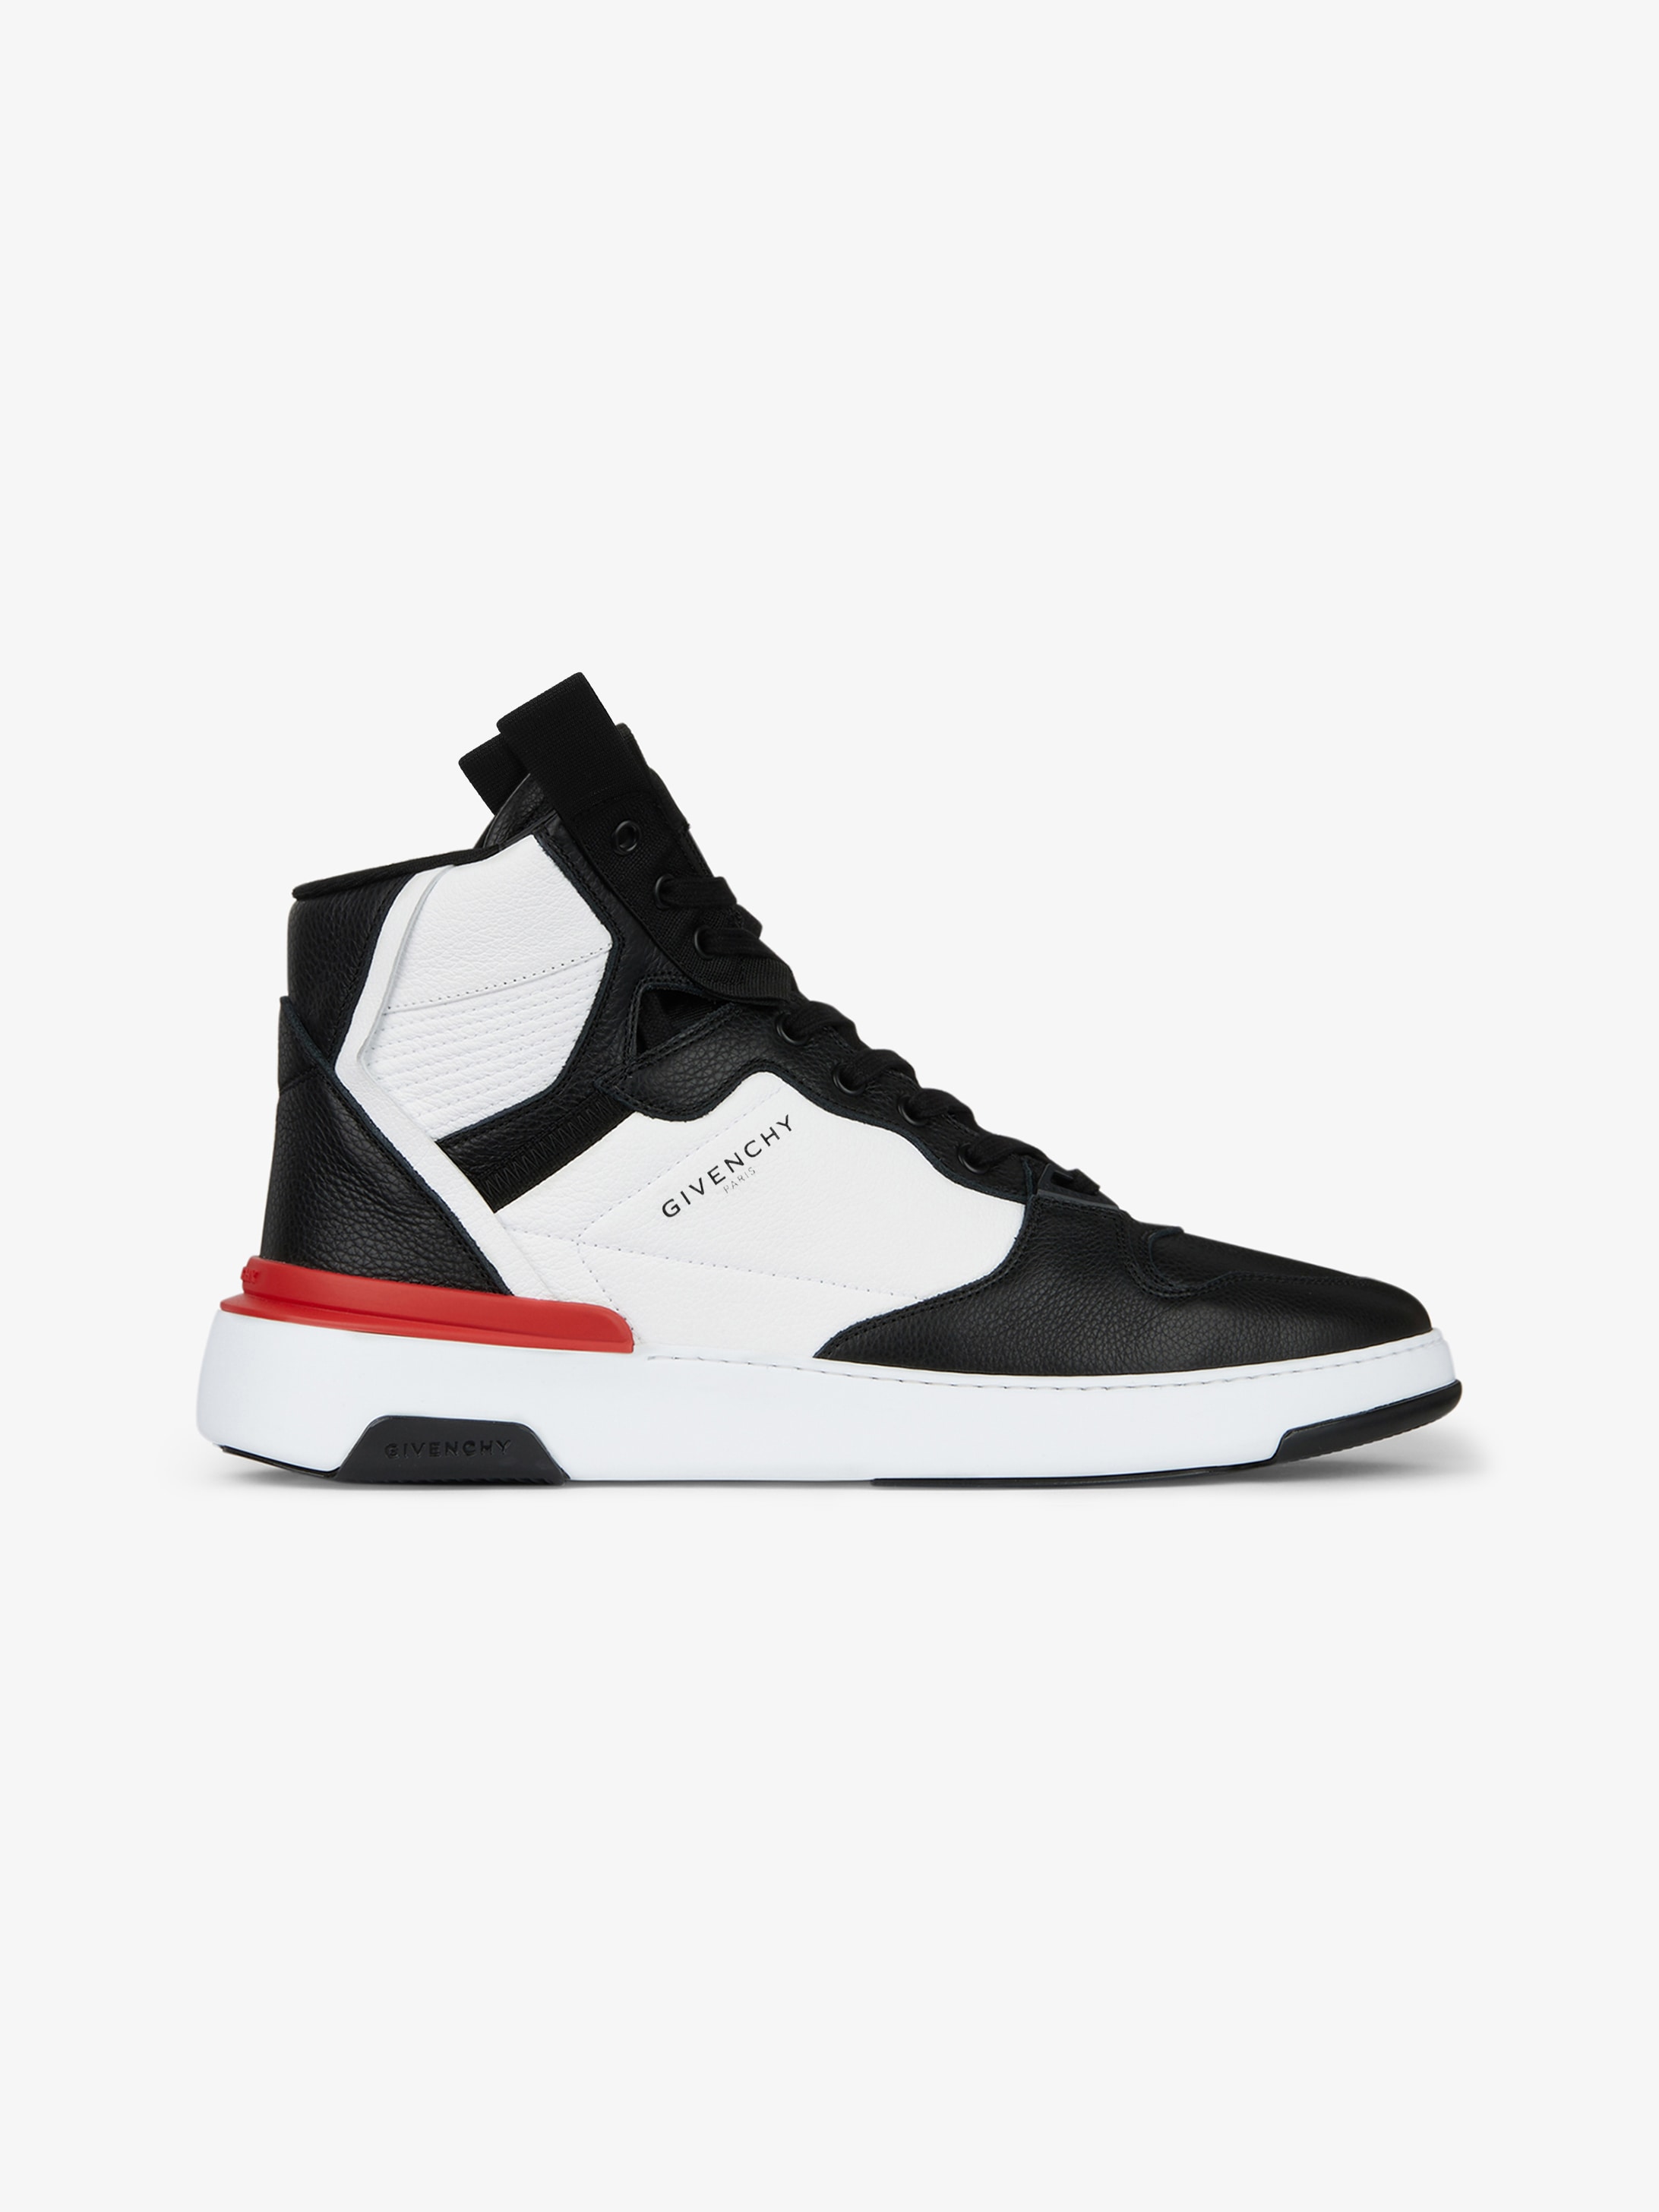 high top givenchy sneakers